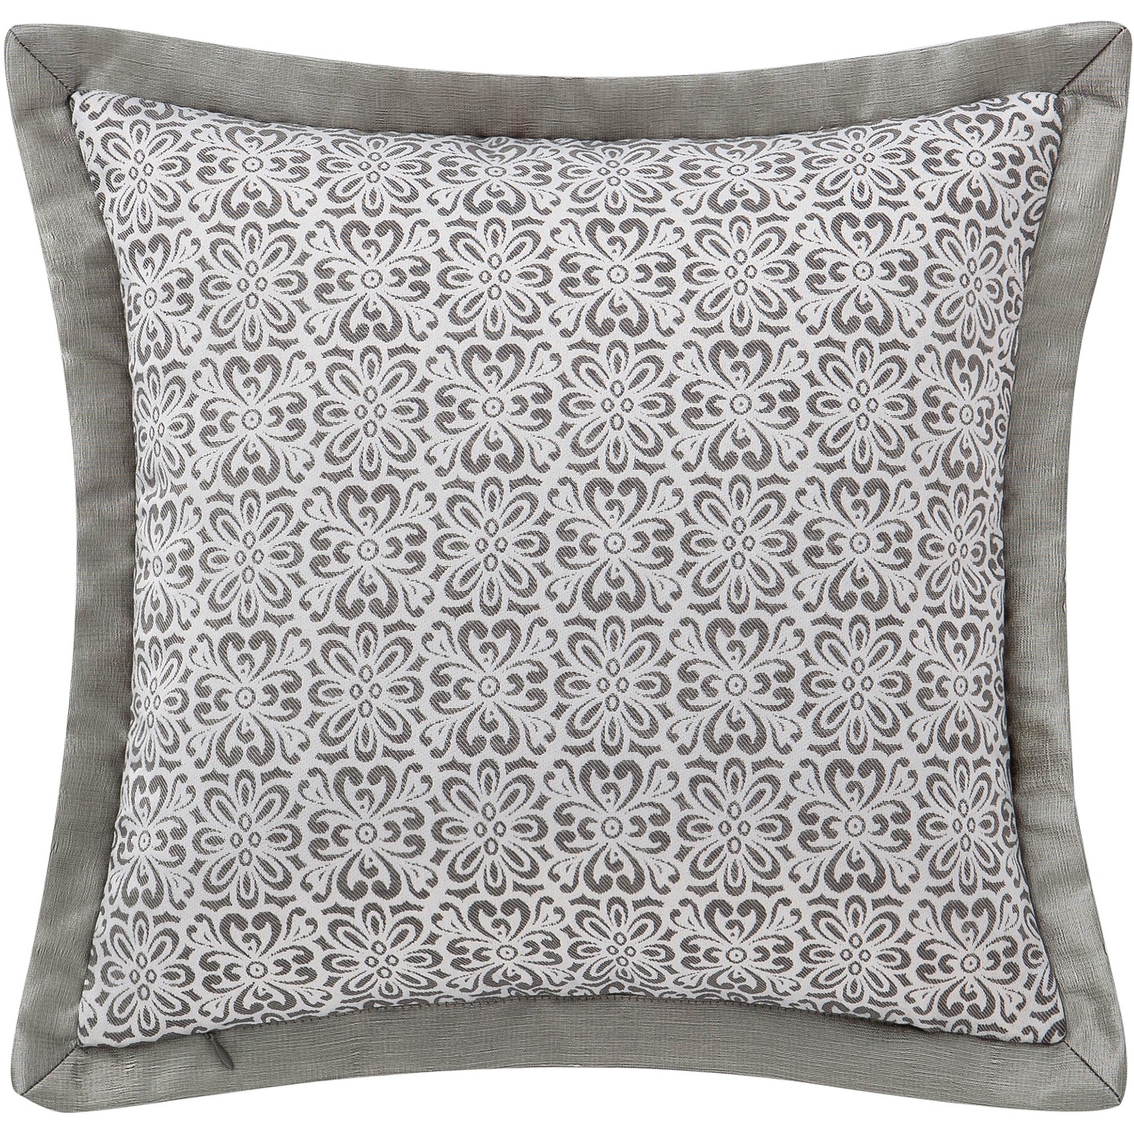 Waterford Celine Dove Grey Decorative Pillow - Image 2 of 2